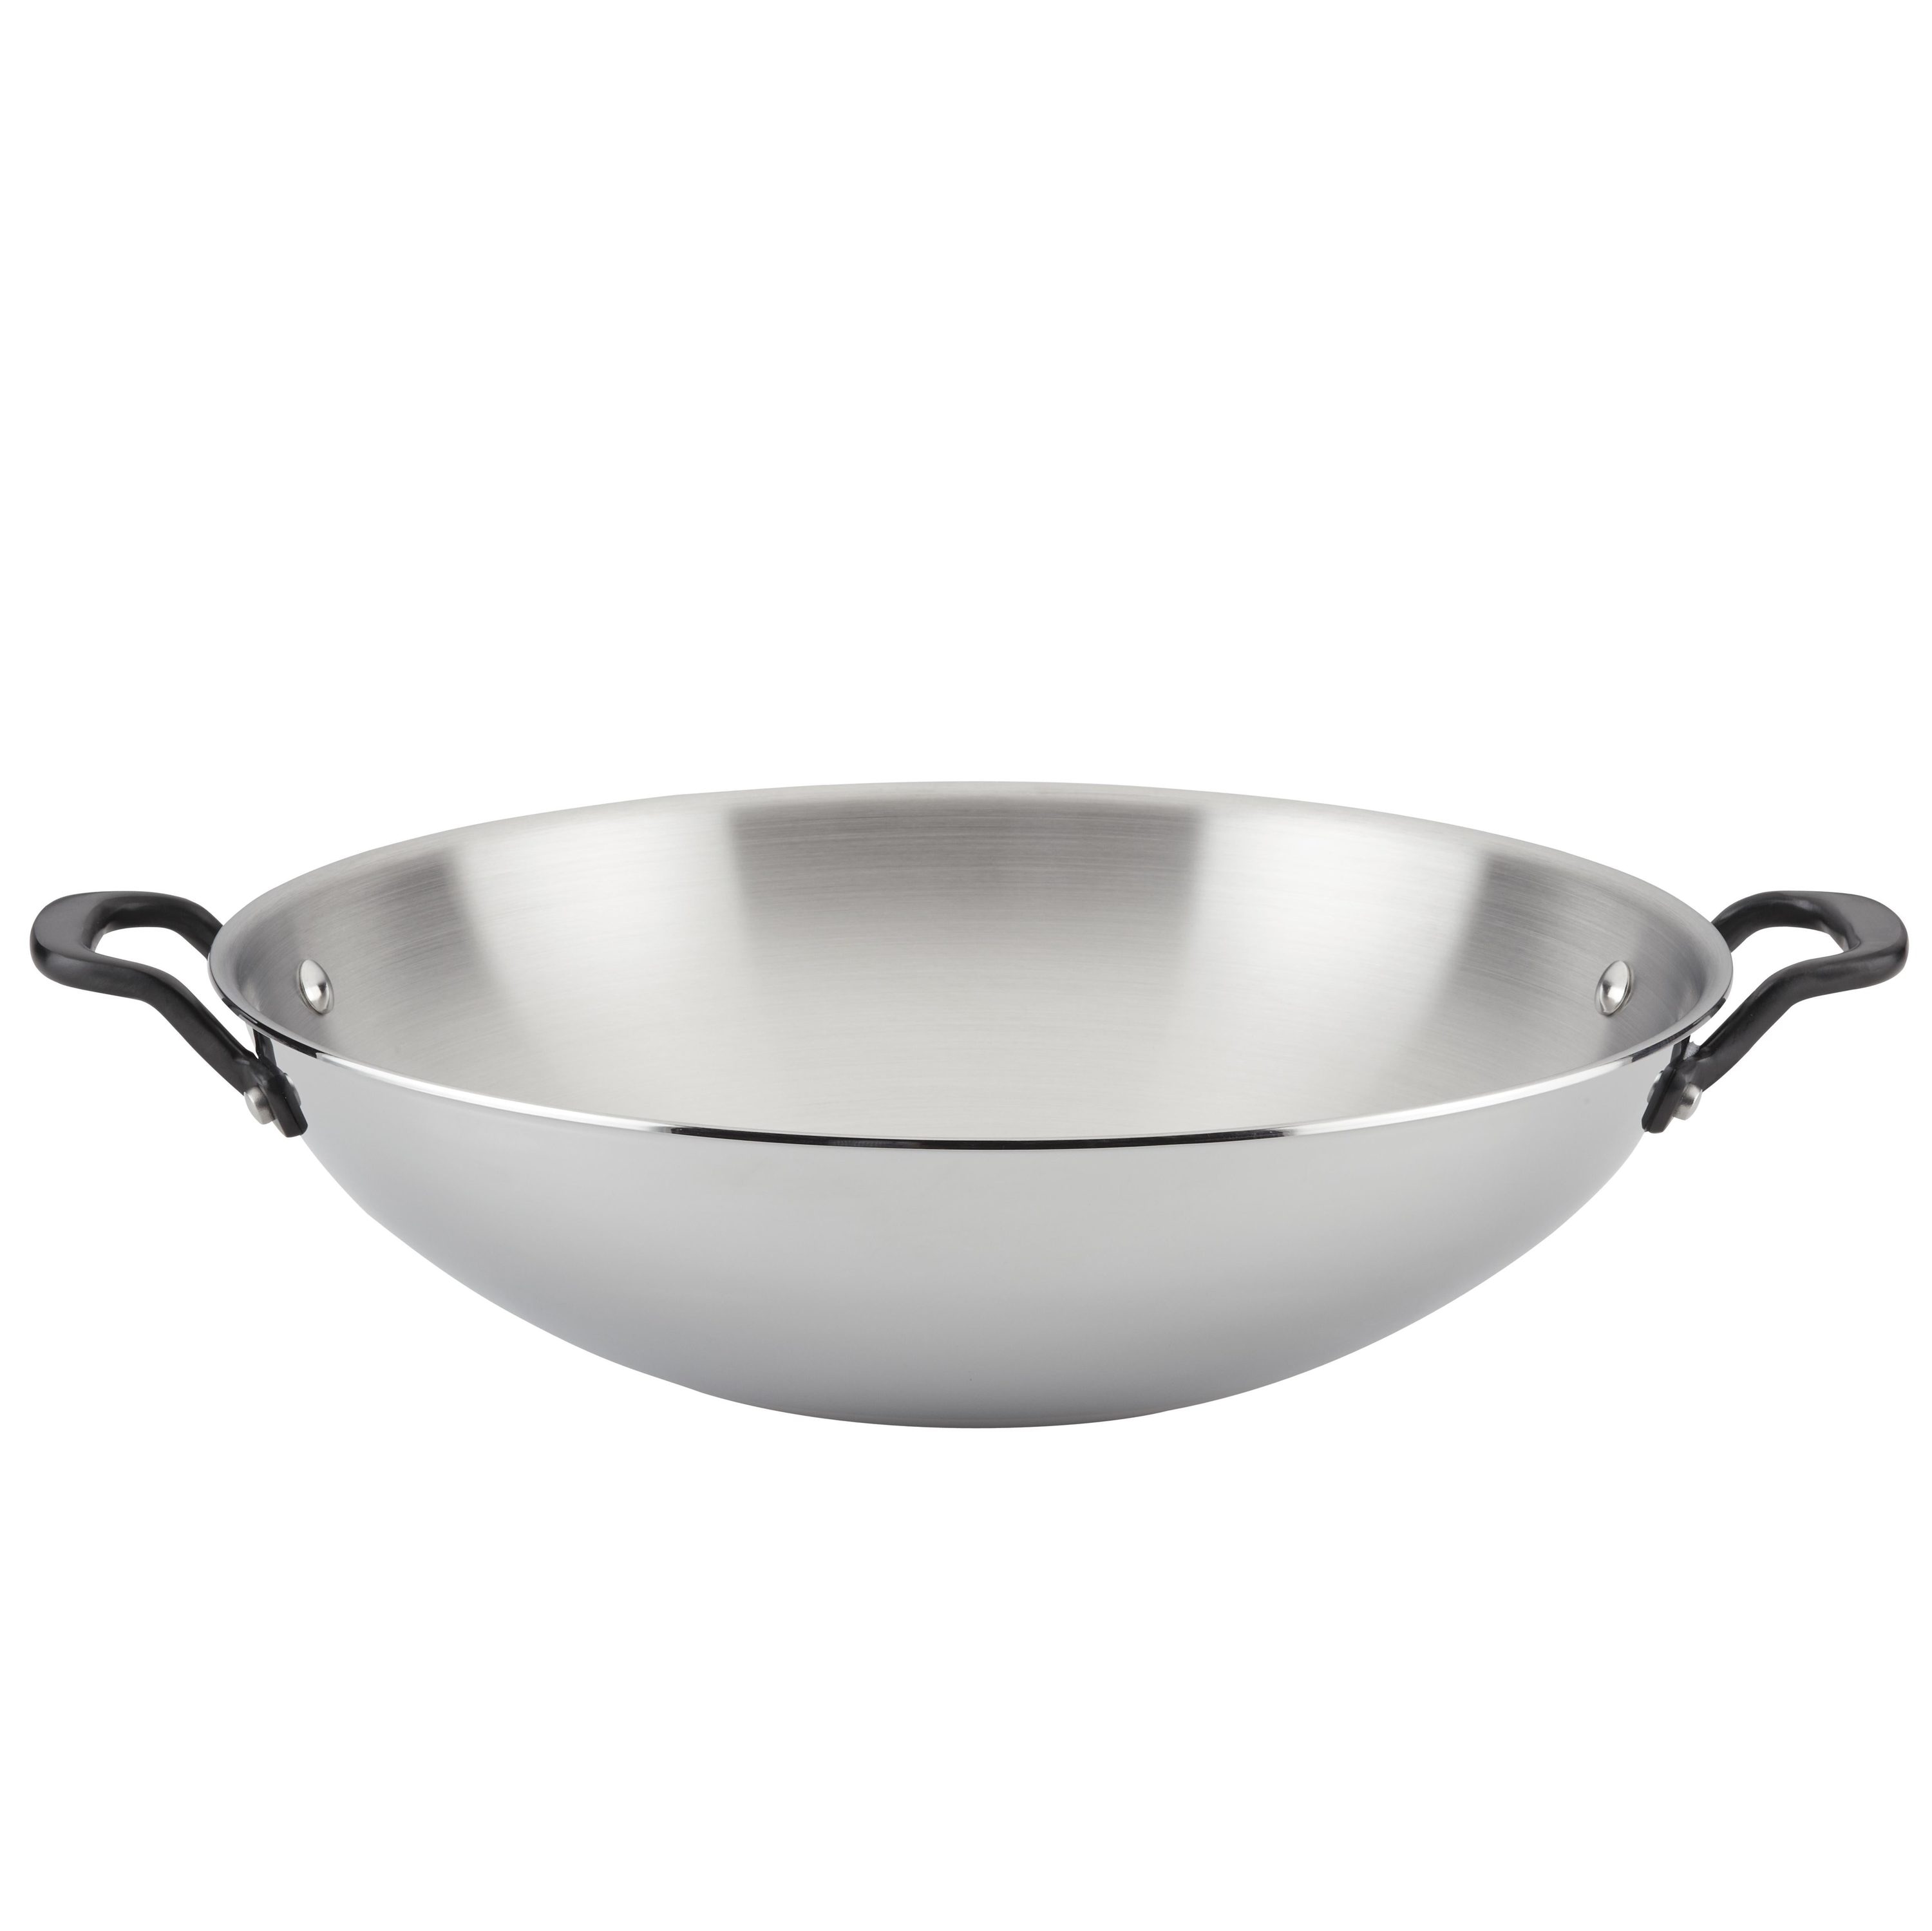 KitchenAid 5-Ply Clad Stainless Steel 12.25 Frying Pan